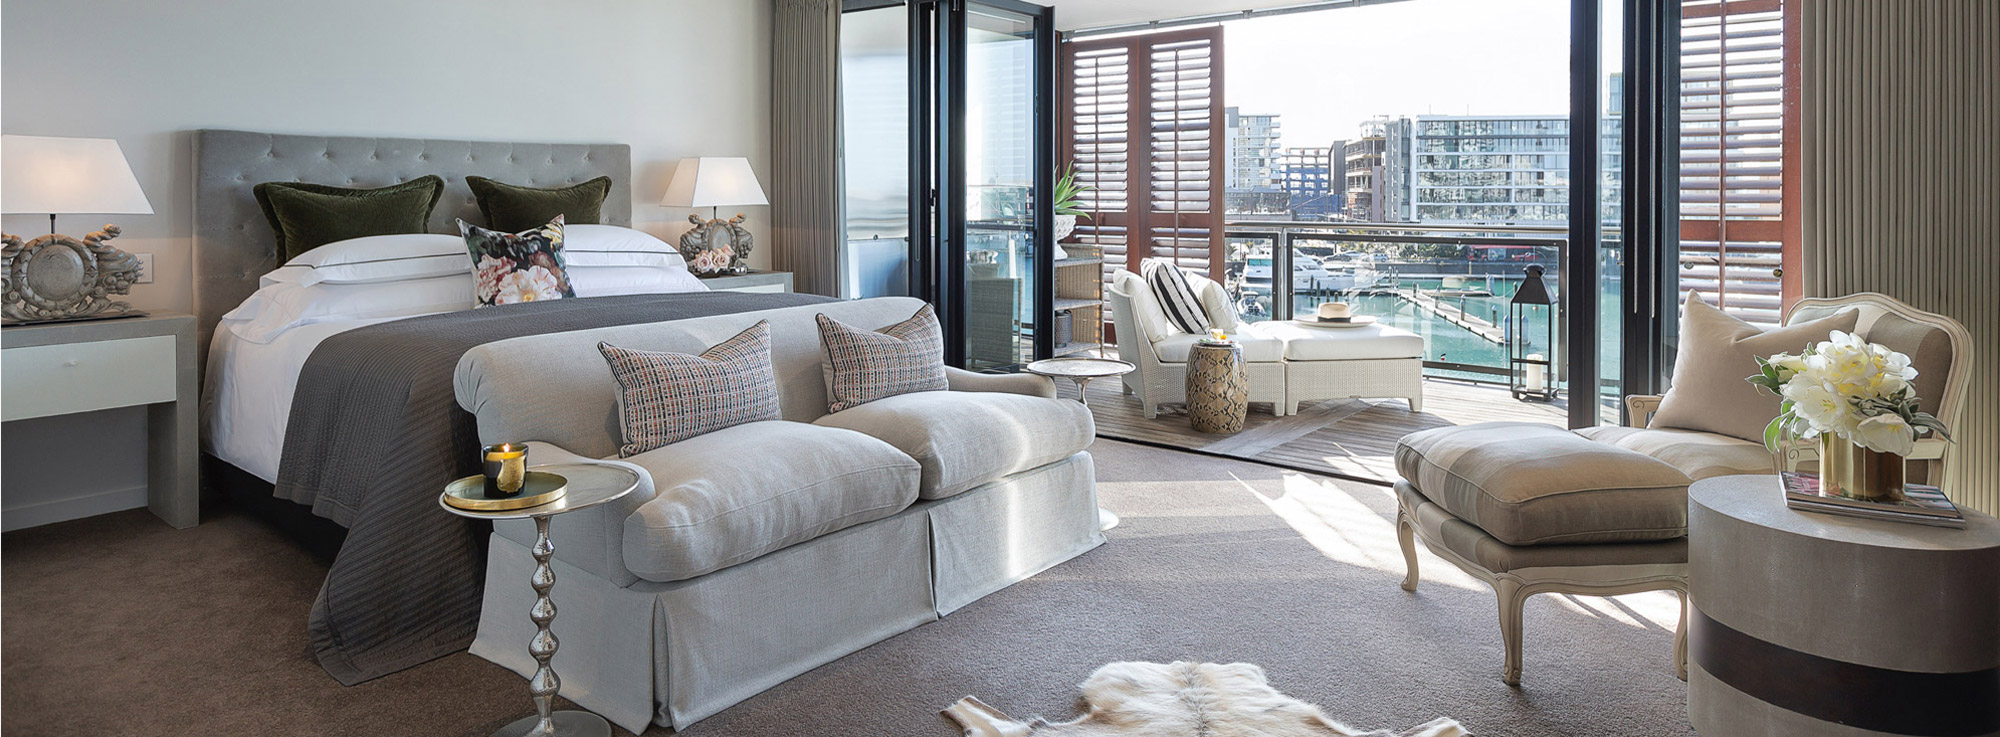 Master Bedroom with Indoor Outdoor Flow & Viaduct Harbour Views | Point Residence Luxury Auckland v2